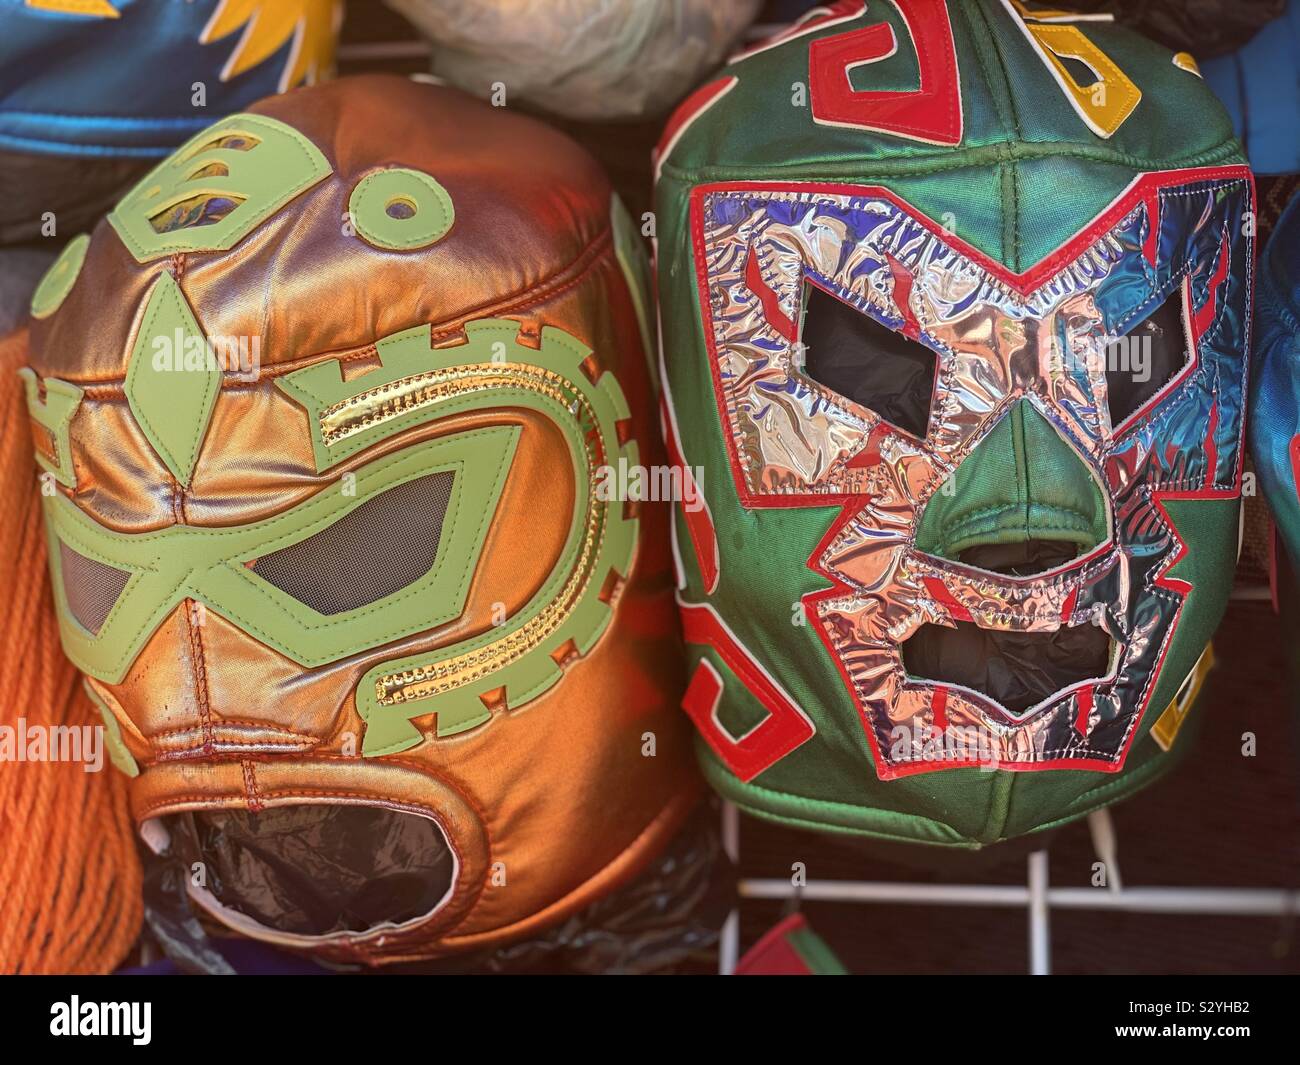 Mexican wrestler masks hanging in a stall waiting to be bought Stock Photo